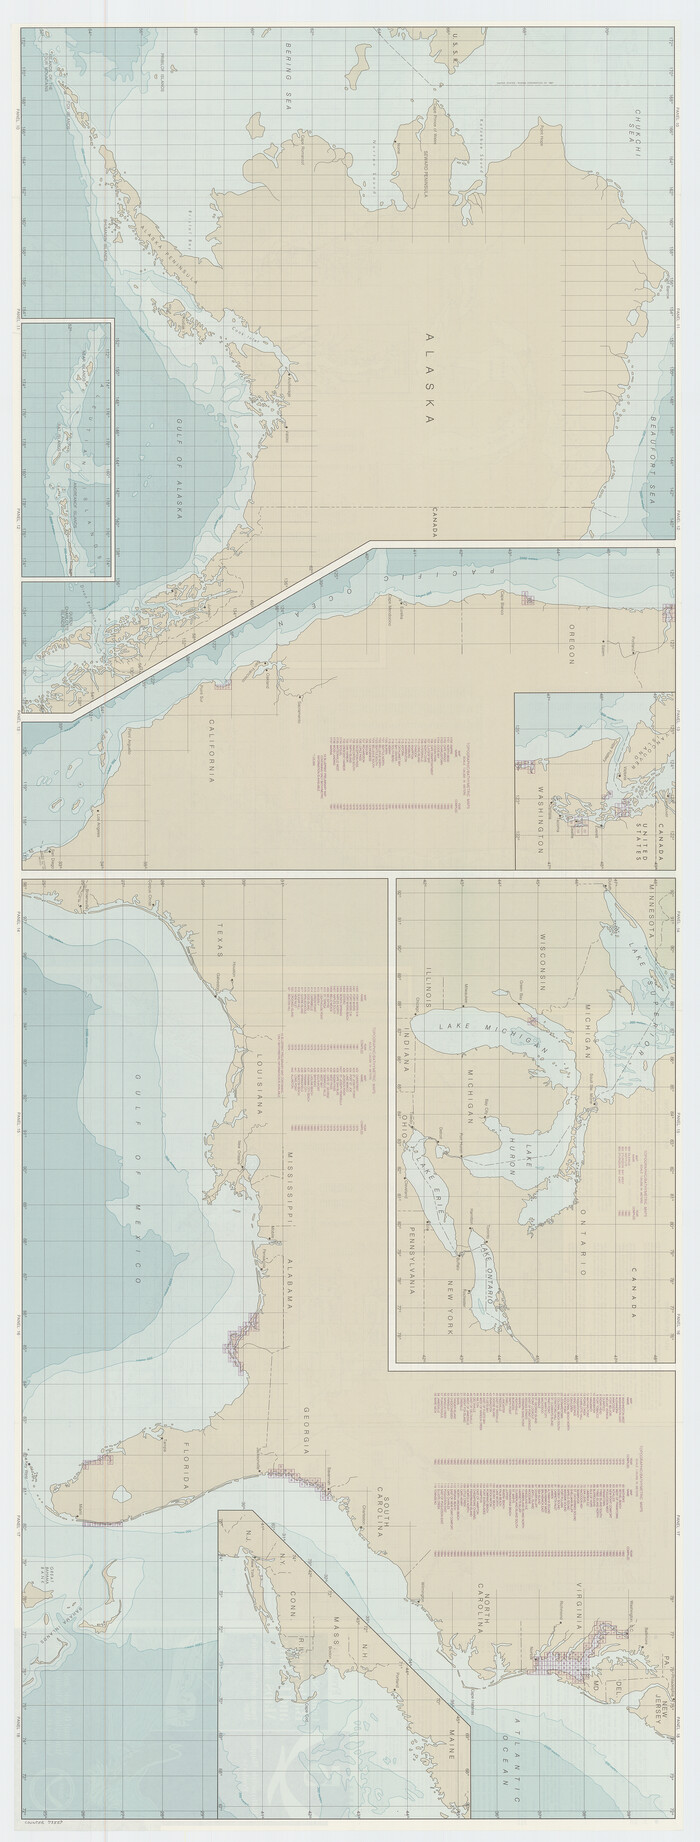 73557, United States Bathymetric and Fishing Maps including Topographic/Bathymetric Maps, General Map Collection